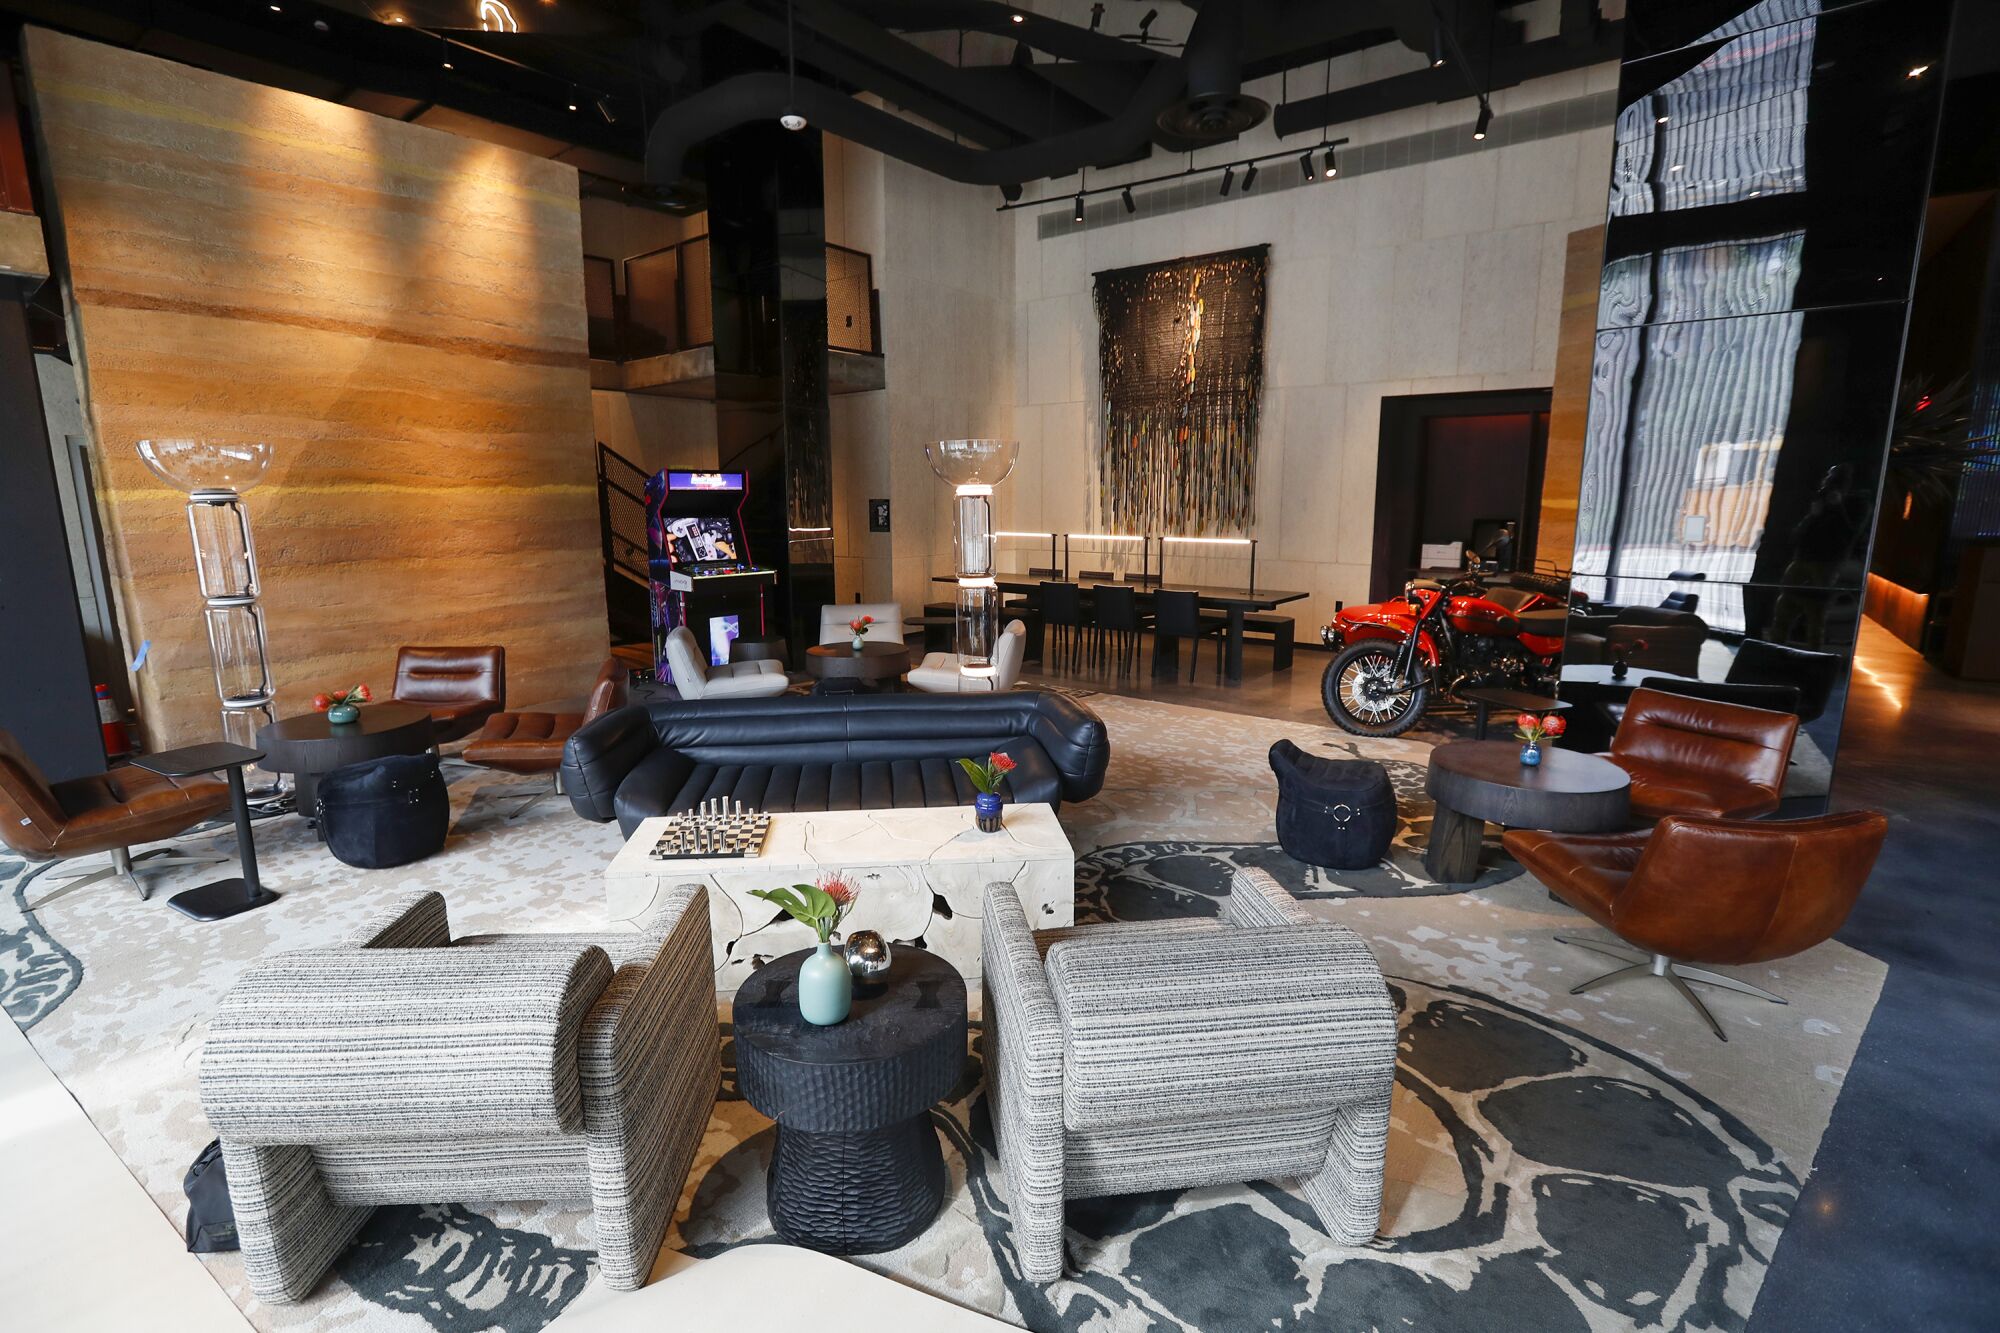 The Moxy lobby has a rammed-earth wall, motorcycle and macrame decoration to evoke a nomadic, desert sensibility.